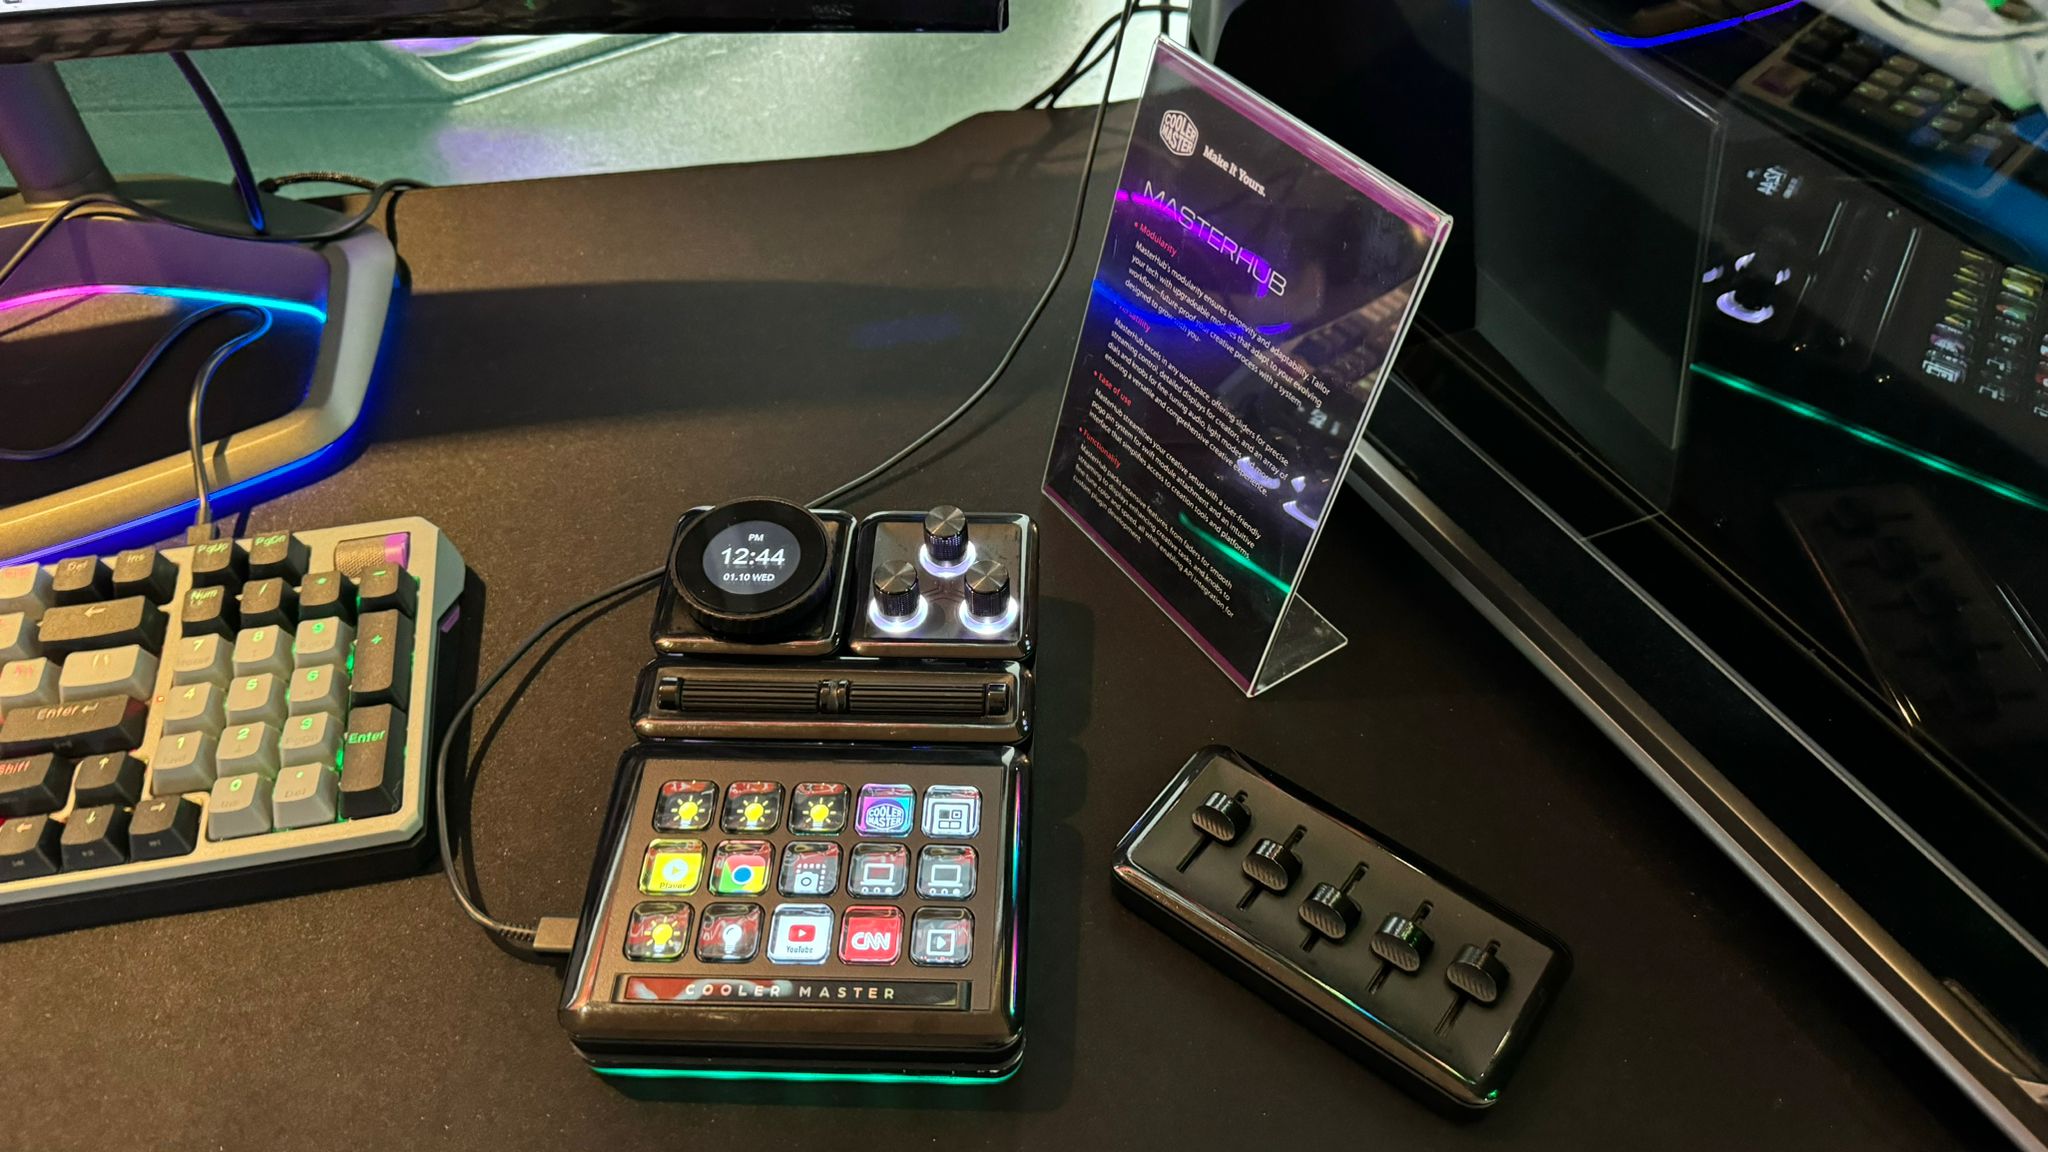 Cooler Master's new MasterHub is a supercharged Stream Deck